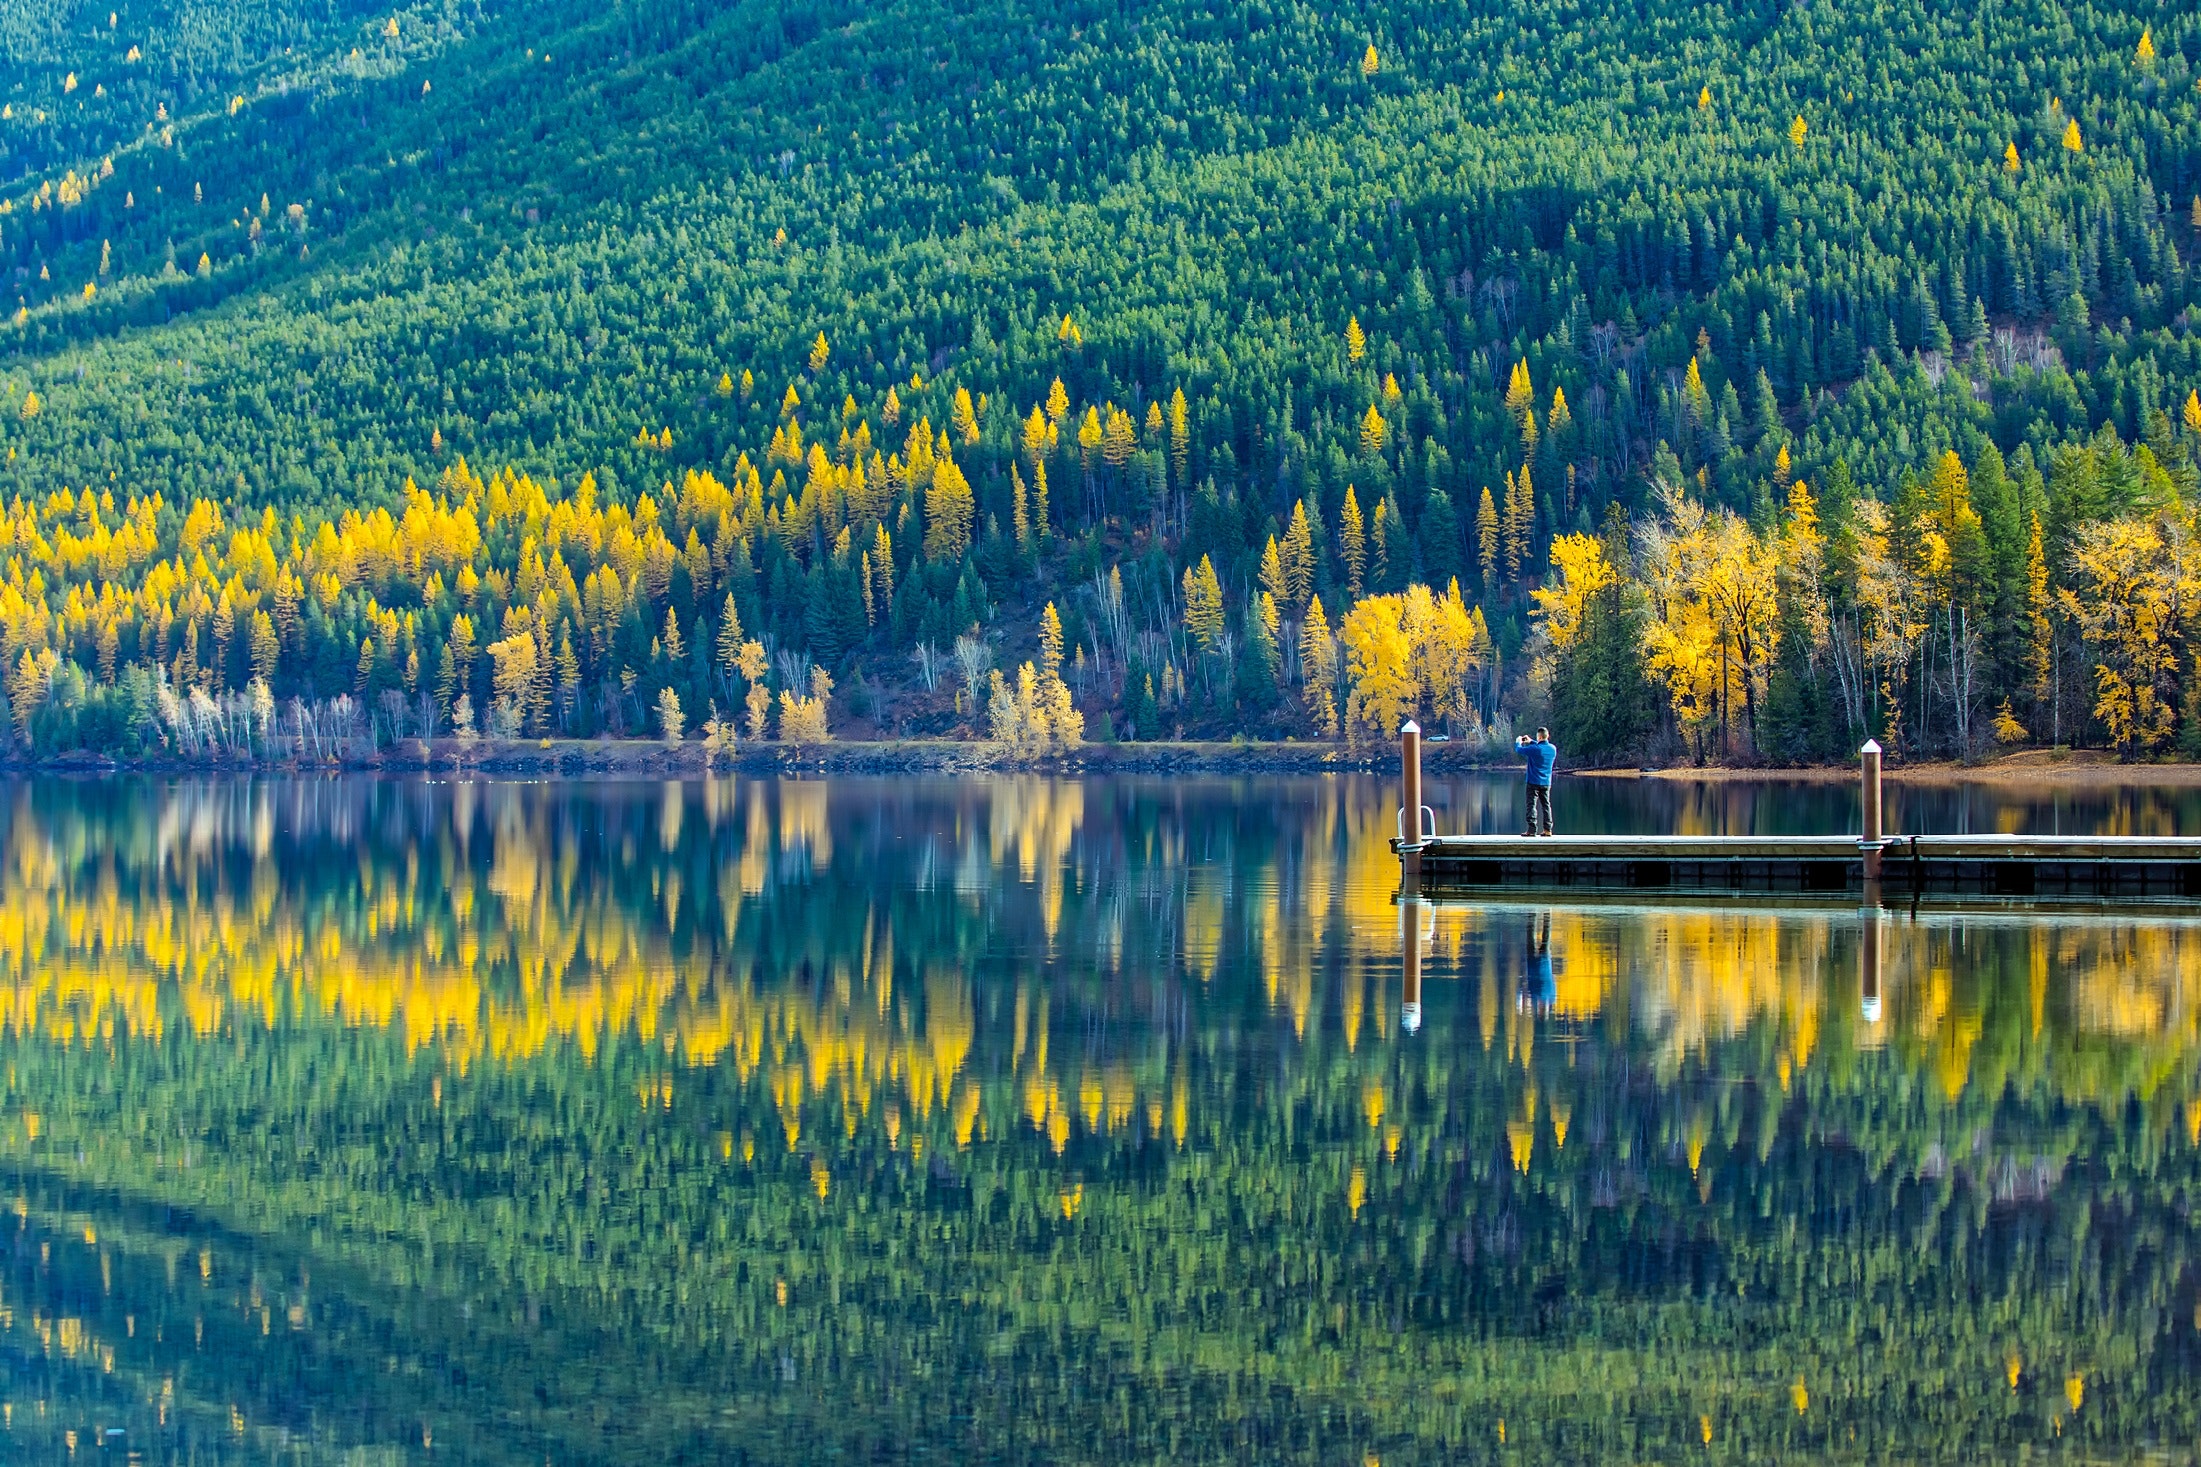 Reflection of trees in lake photo